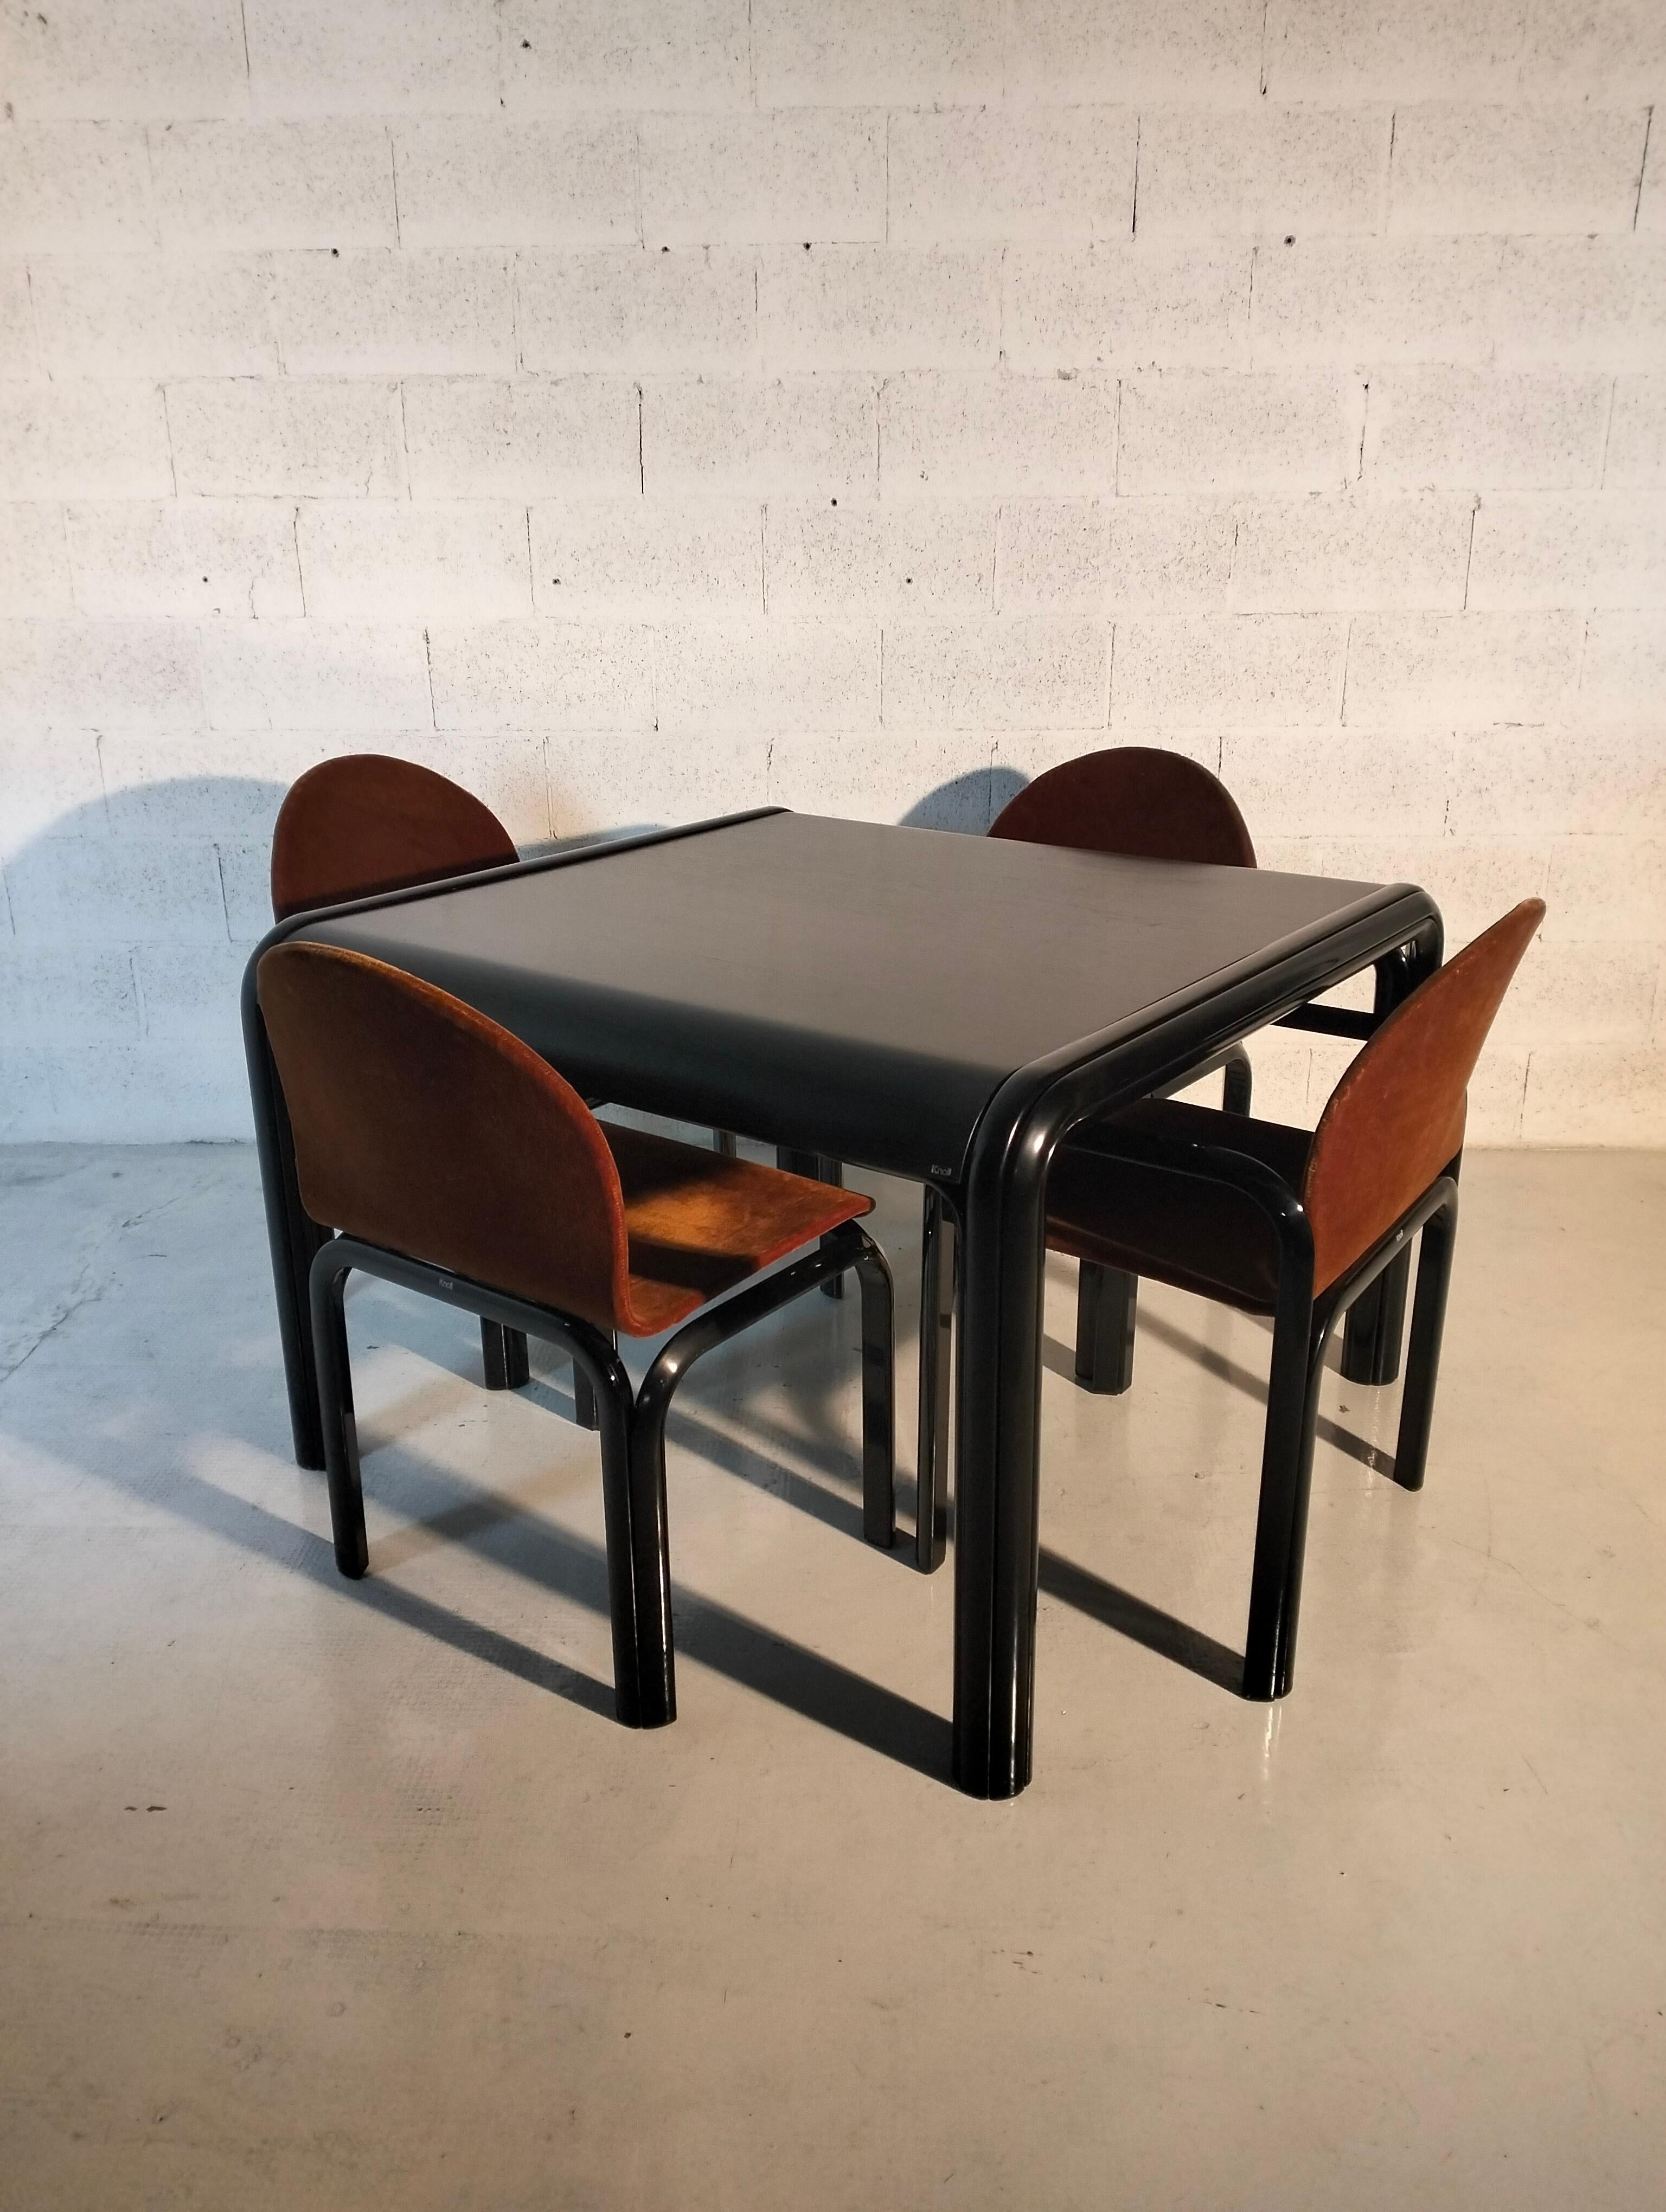 A mid century modern dining table and four chairs designed by Gae Aulenti and made by Knoll. 
The table with a black rolled steel frame and black laminate top. 
The chairs with black extruded aluminum frames and brown fabric,  2 with armrests and 2